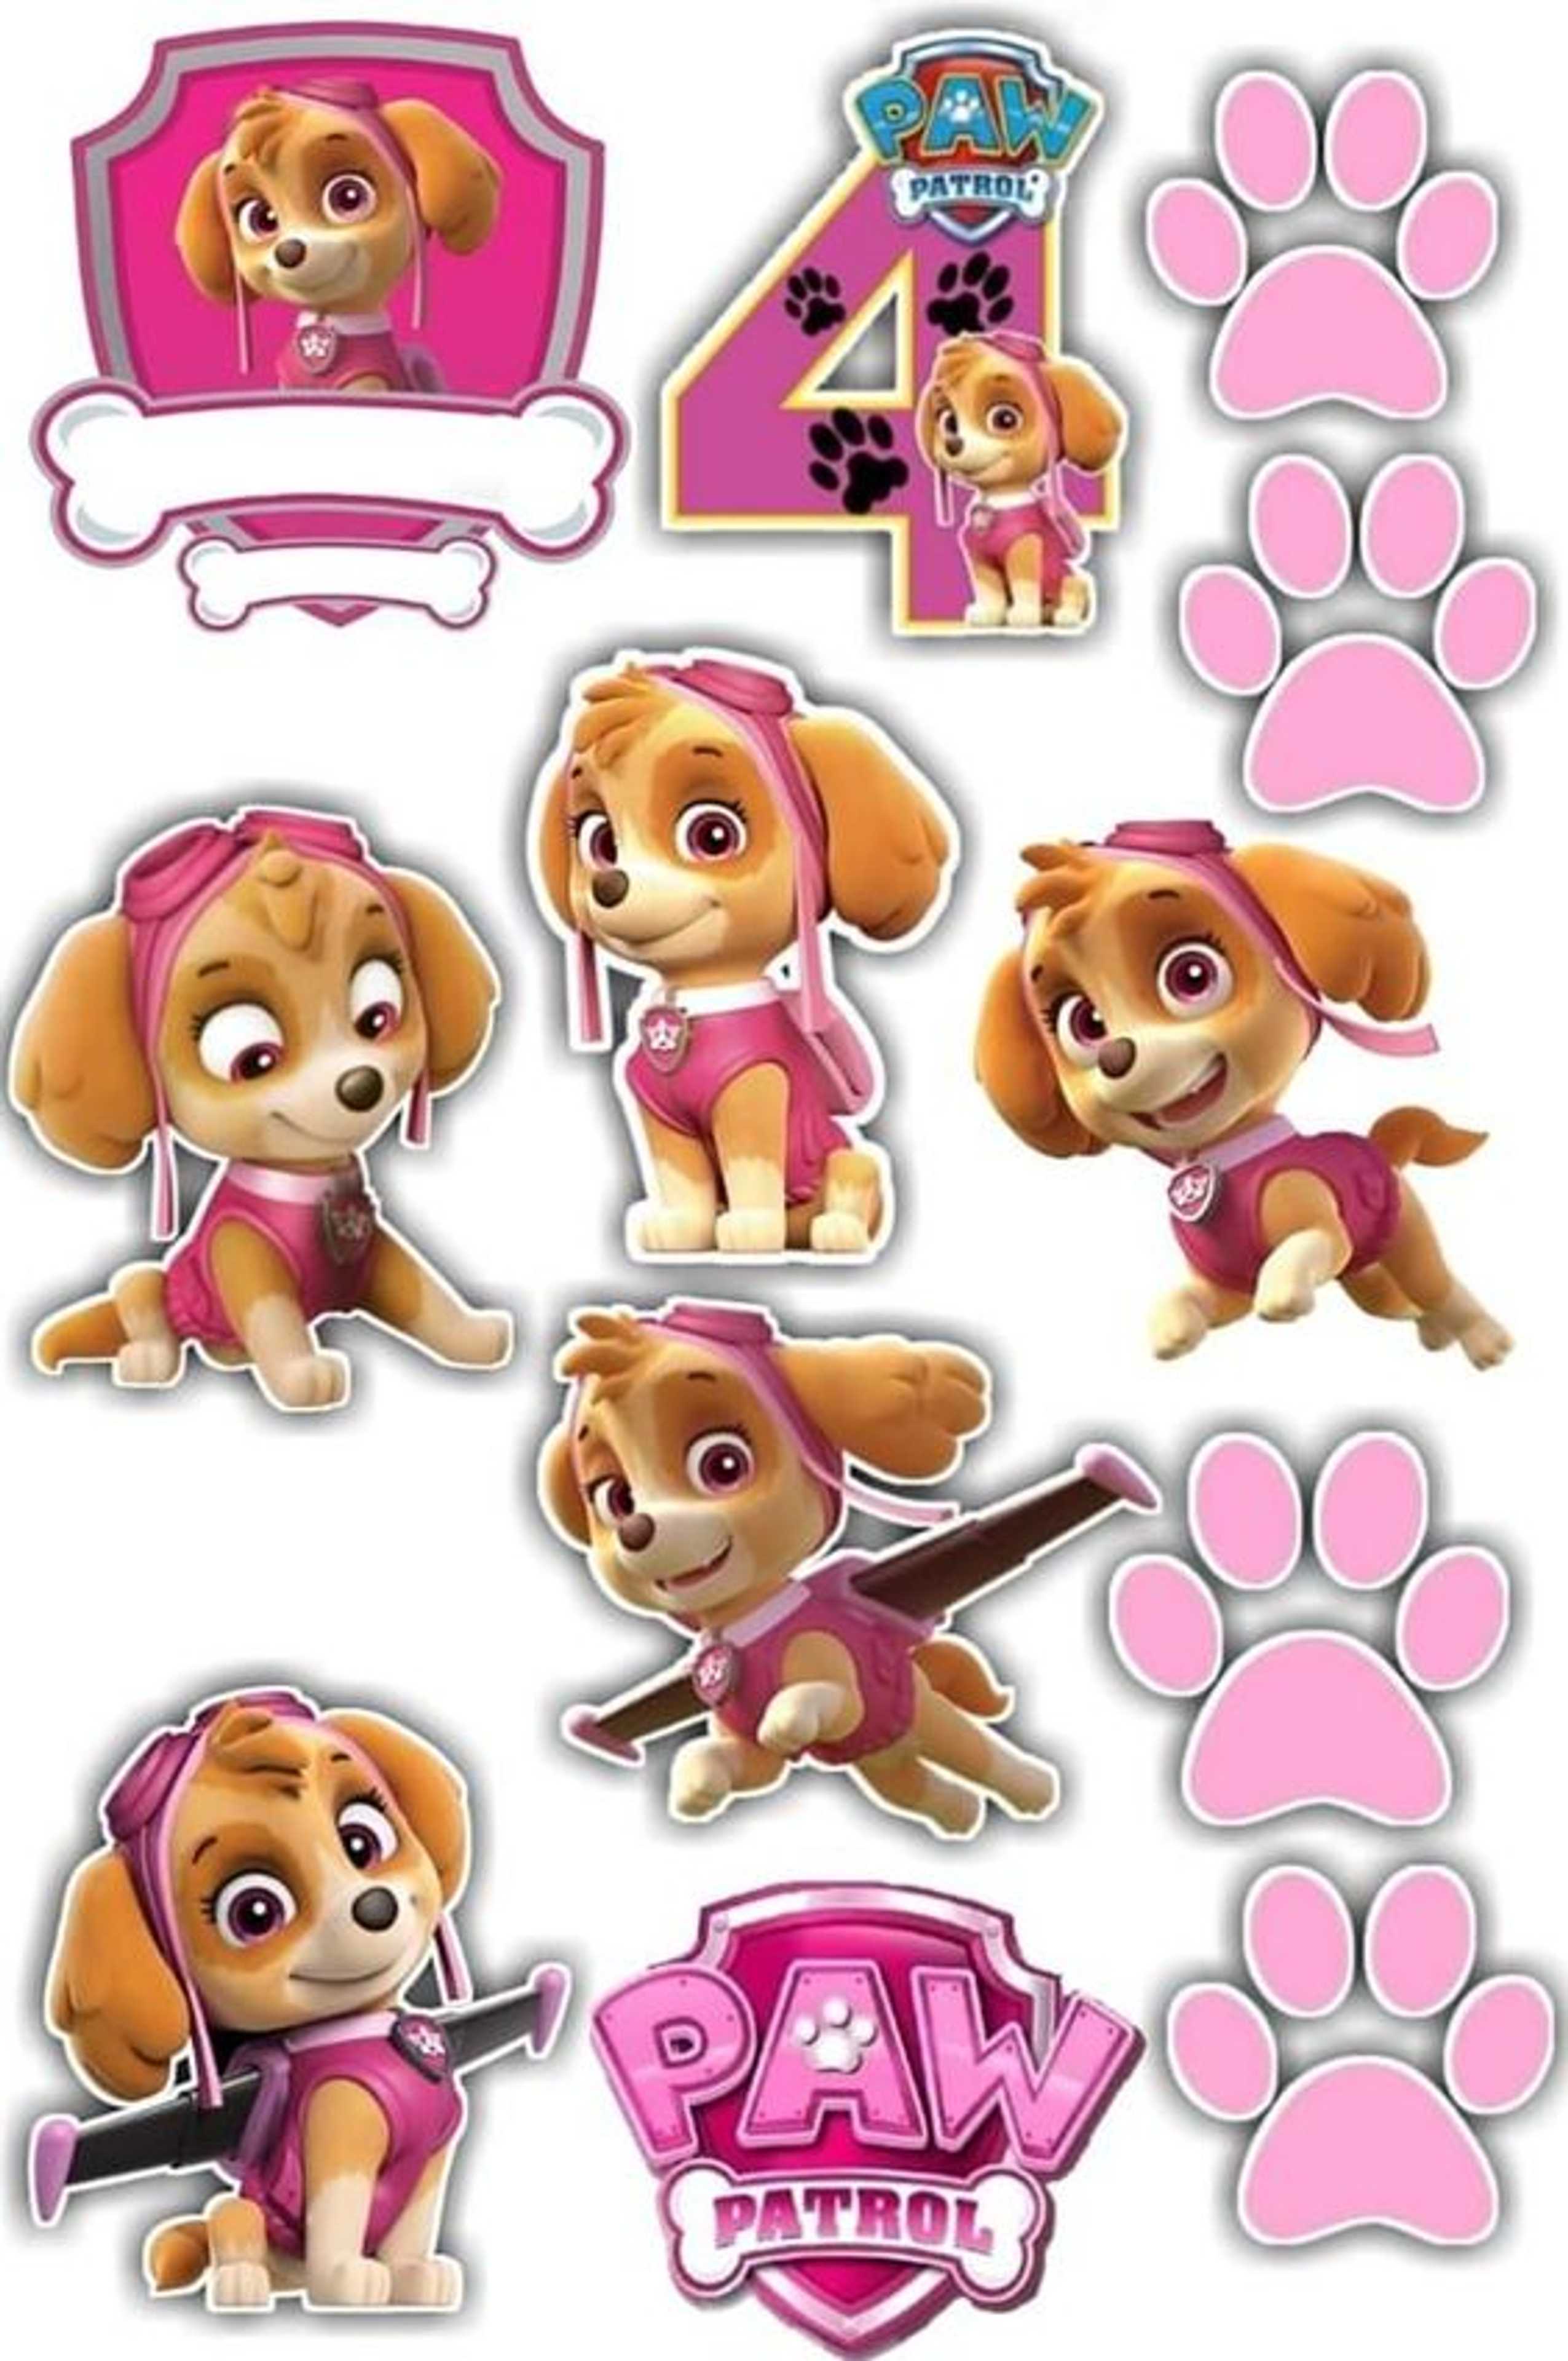 10 Pcs/Pack of Paw Patrol Decal Stickers For Mobiles Tablet Bike Car Fridge Etc